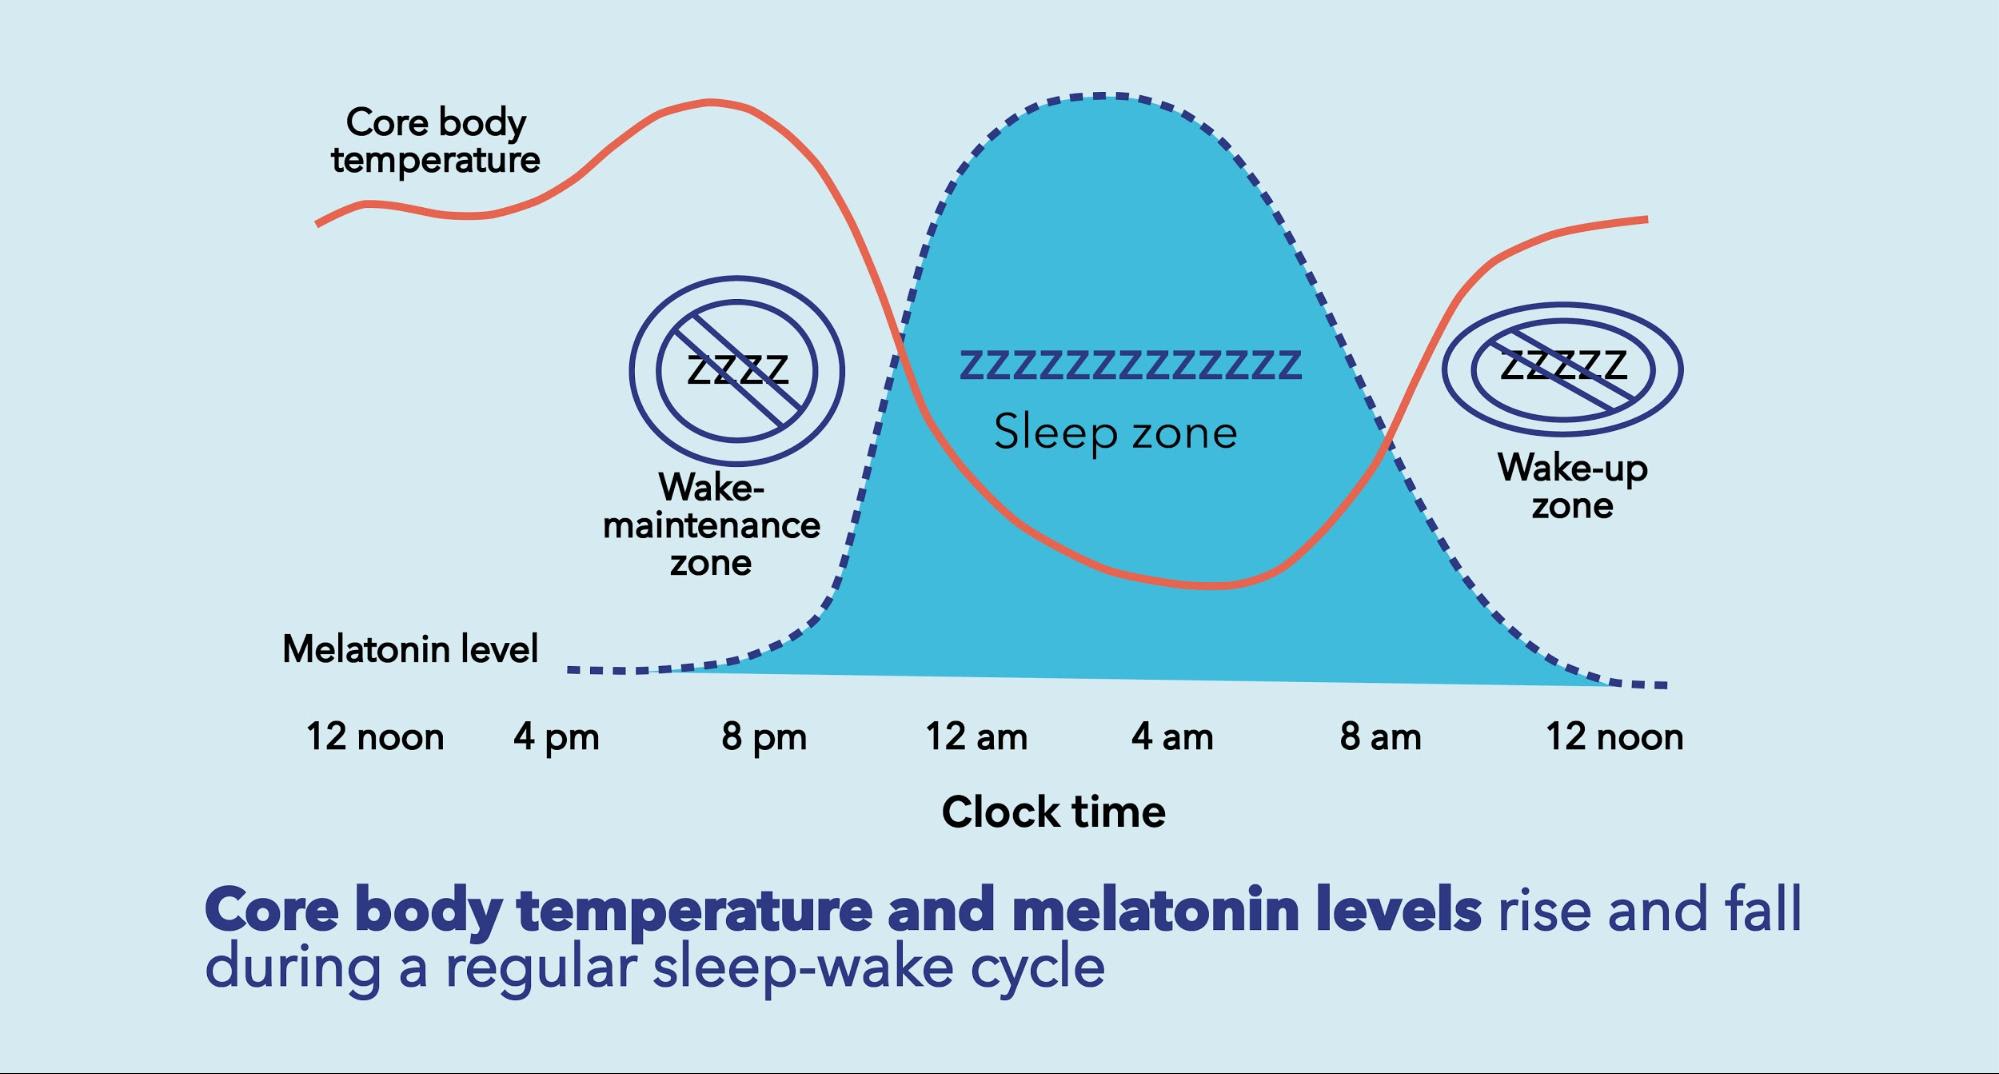 Core body temperature and melatonin levels rise and fall during a regular sleep-wake cycle.